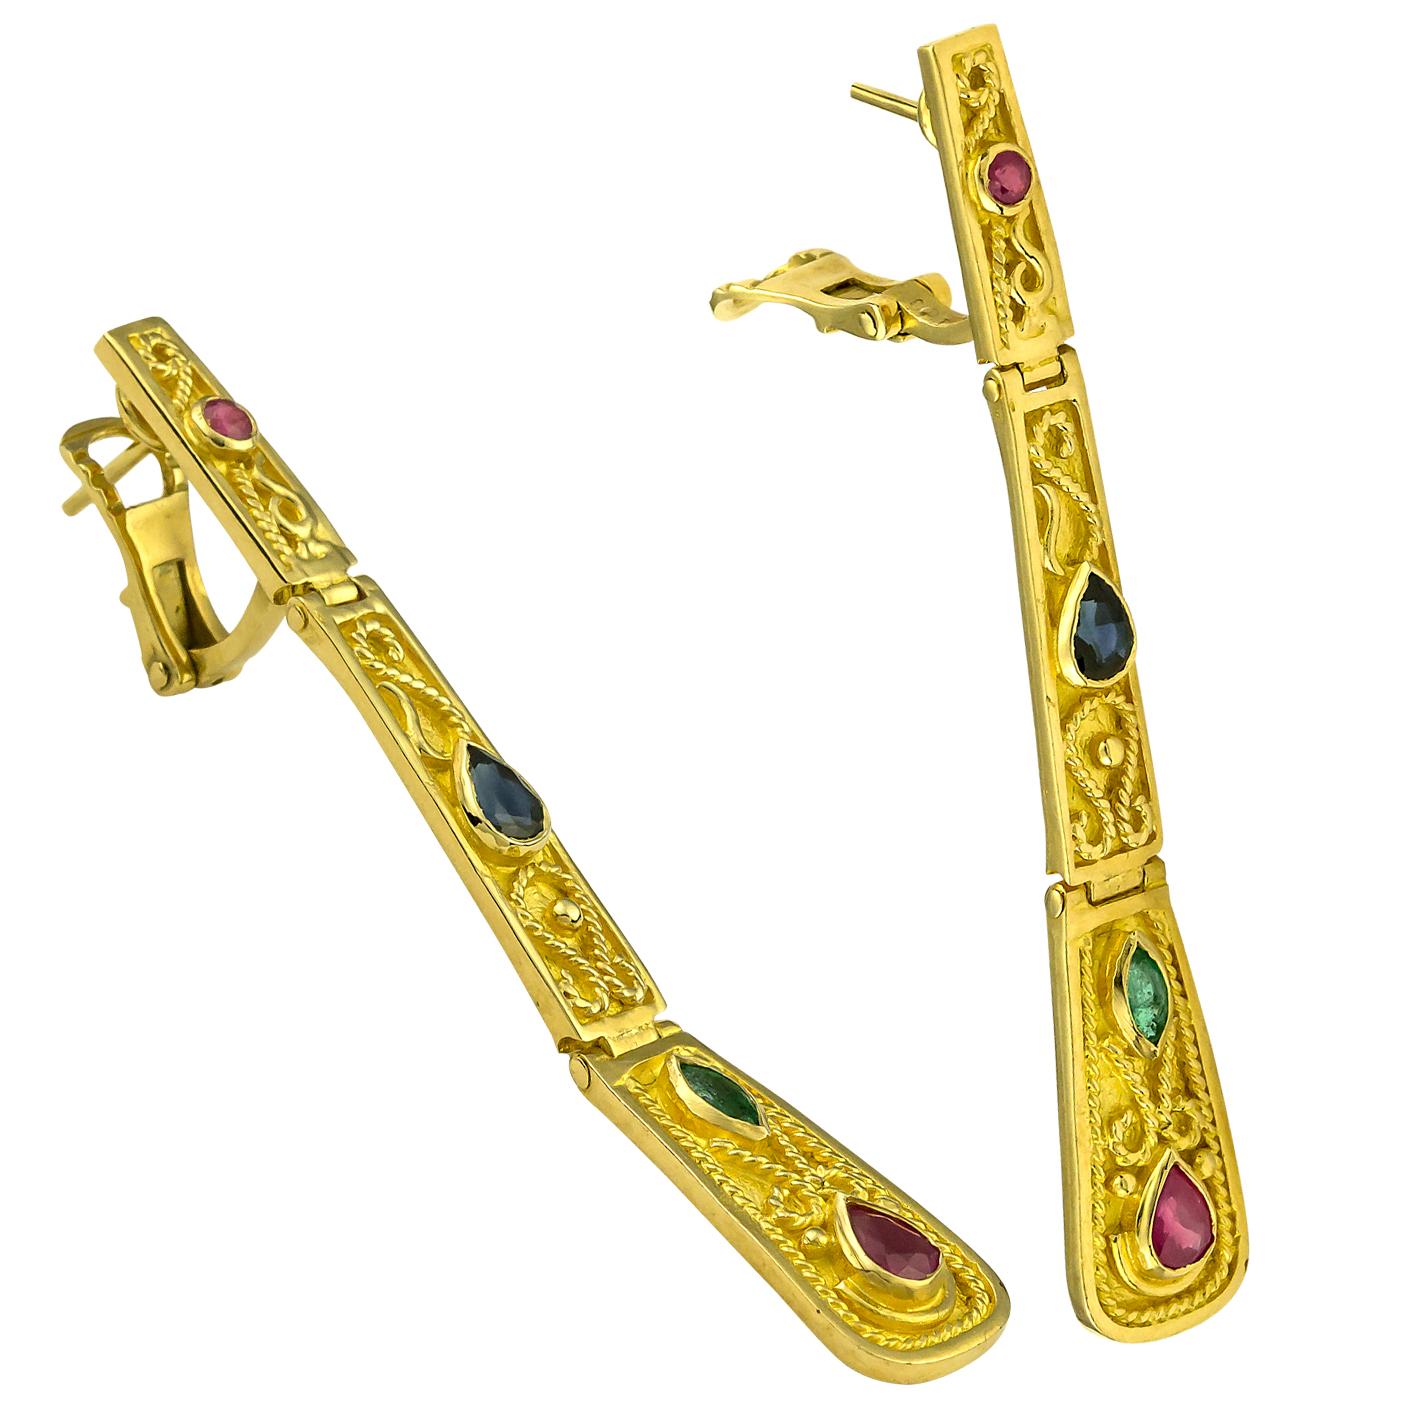 S.Georgios designer Earrings 18 Karat yellow gold all handmade and microscopically decorated with granulation workmanship and a unique velvet finish on the background. This stunning pair of Earrings feature Rubies, Sapphires and Emeralds total